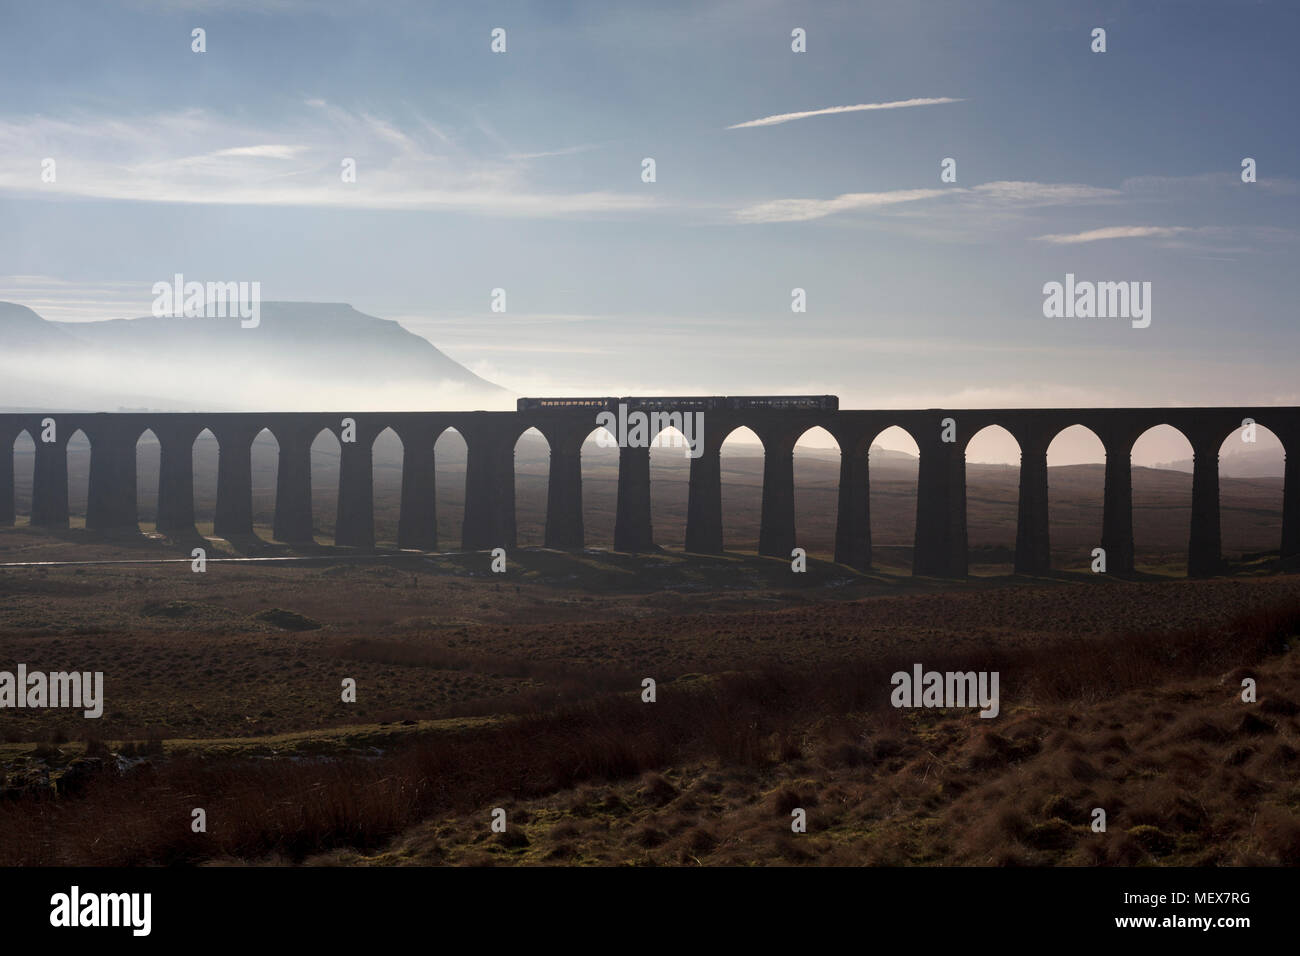 A Northern rail class 153 + 156 sprinter trains cross Ribblehead viaduct on the Settle to Carlisle railway with a misty Ingleborough behind Stock Photo